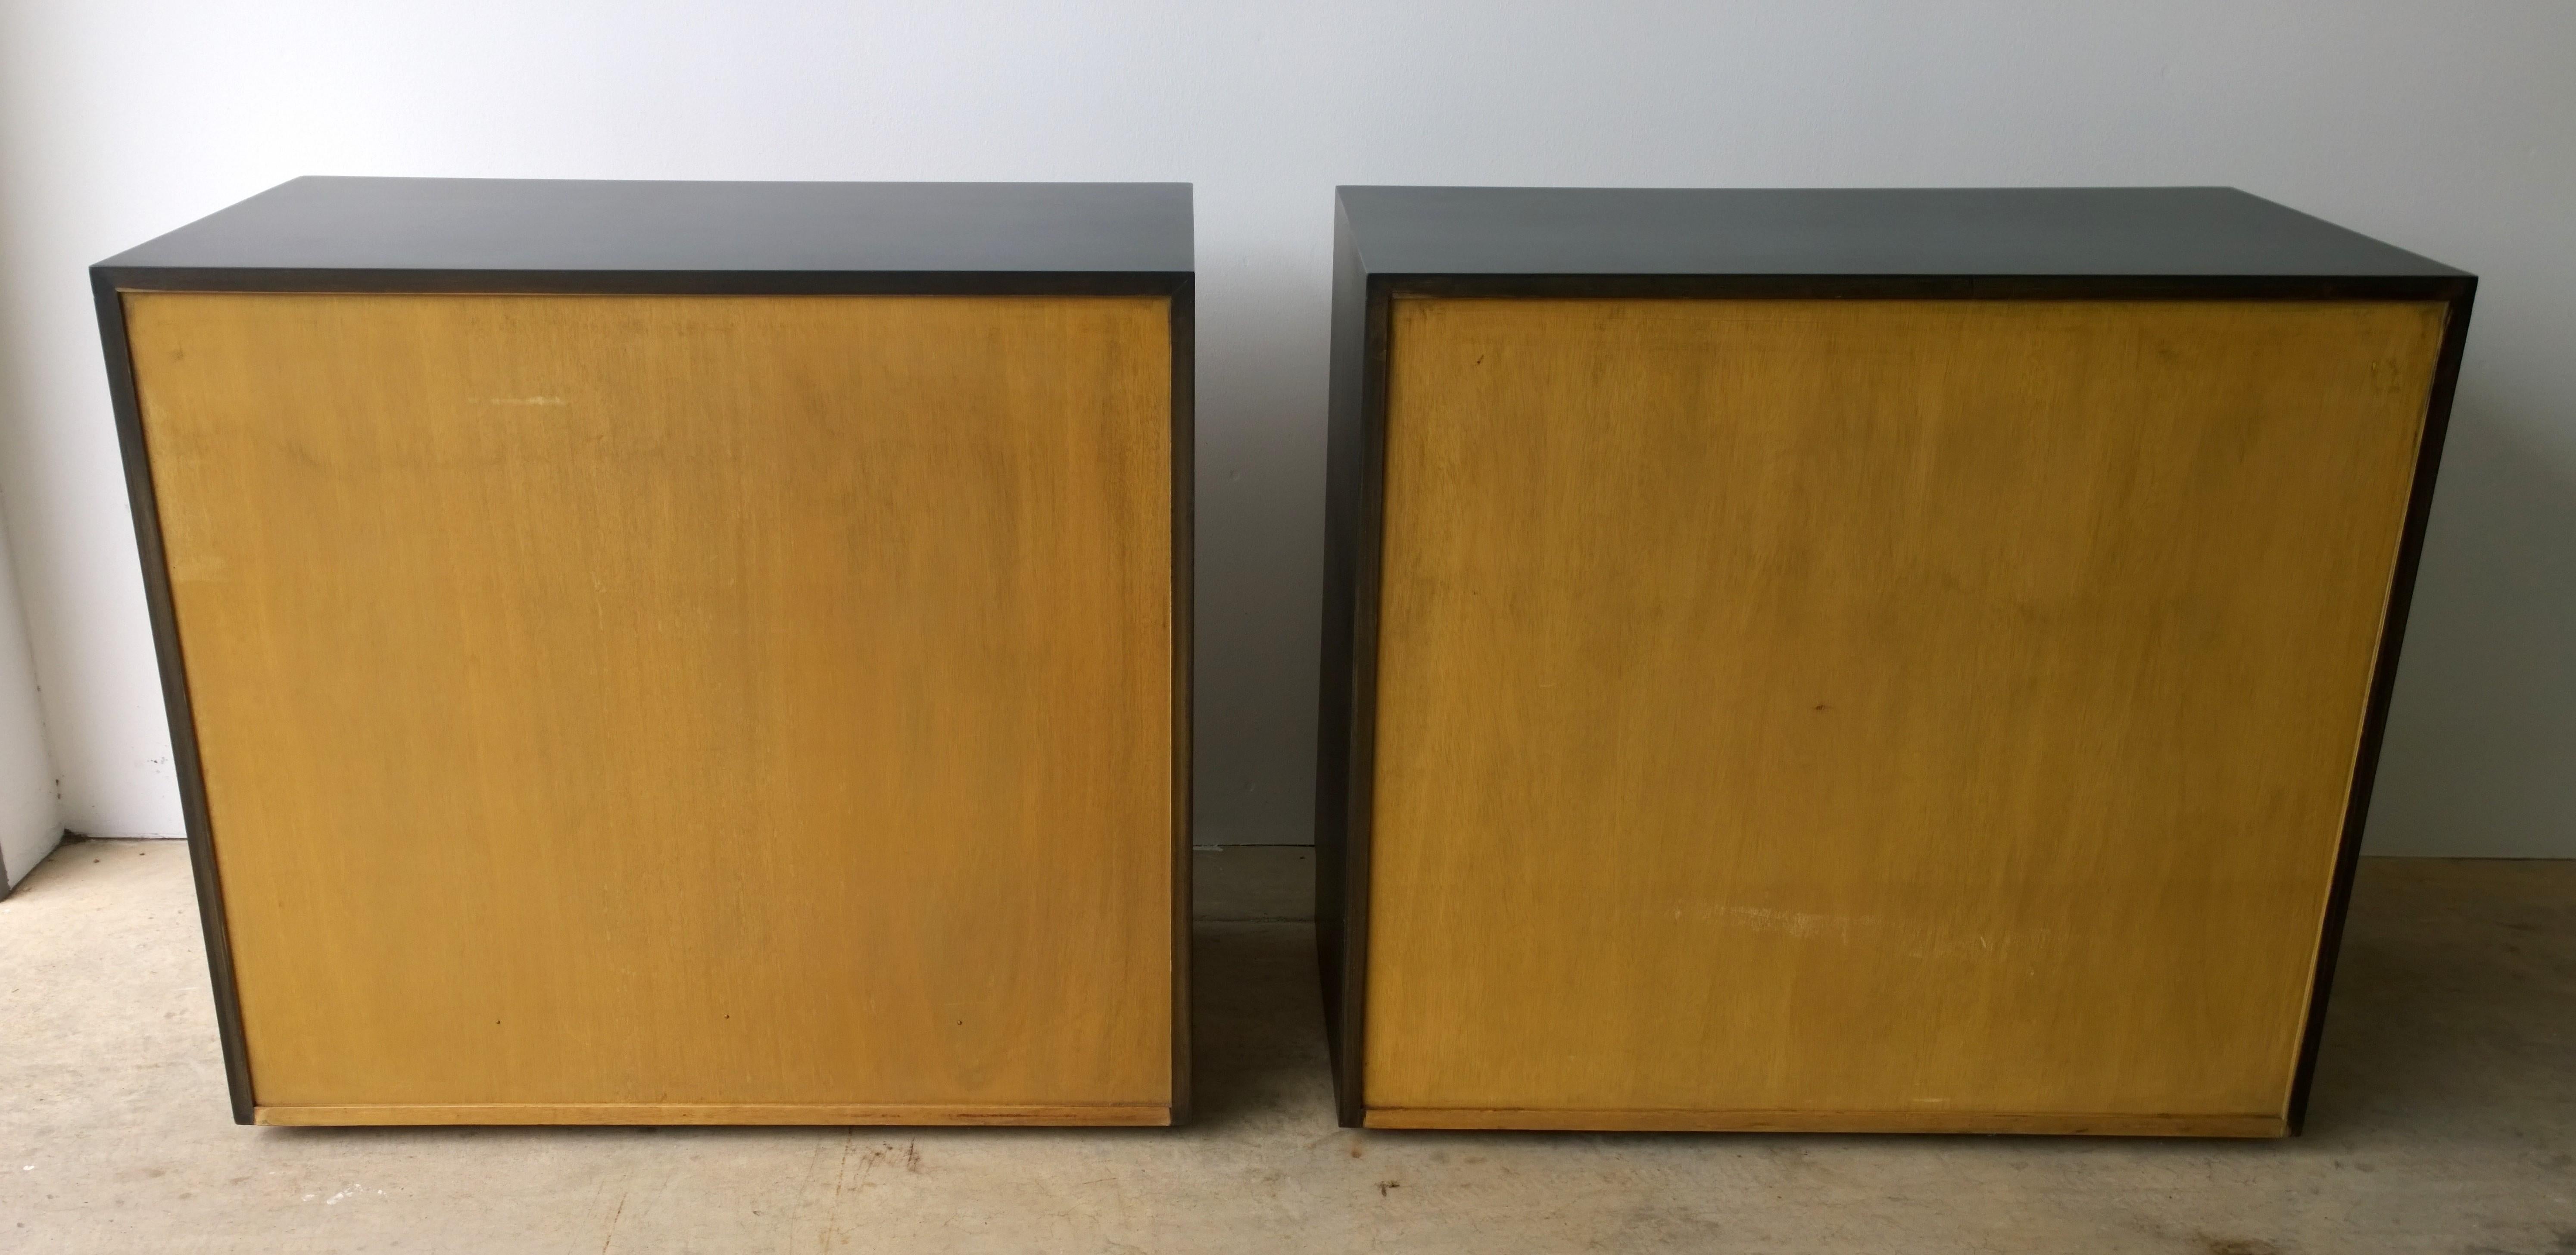 Pair of Black Refinished Wood Frame & Burl Wood Doors with Brass Pulls Cabinets For Sale 7